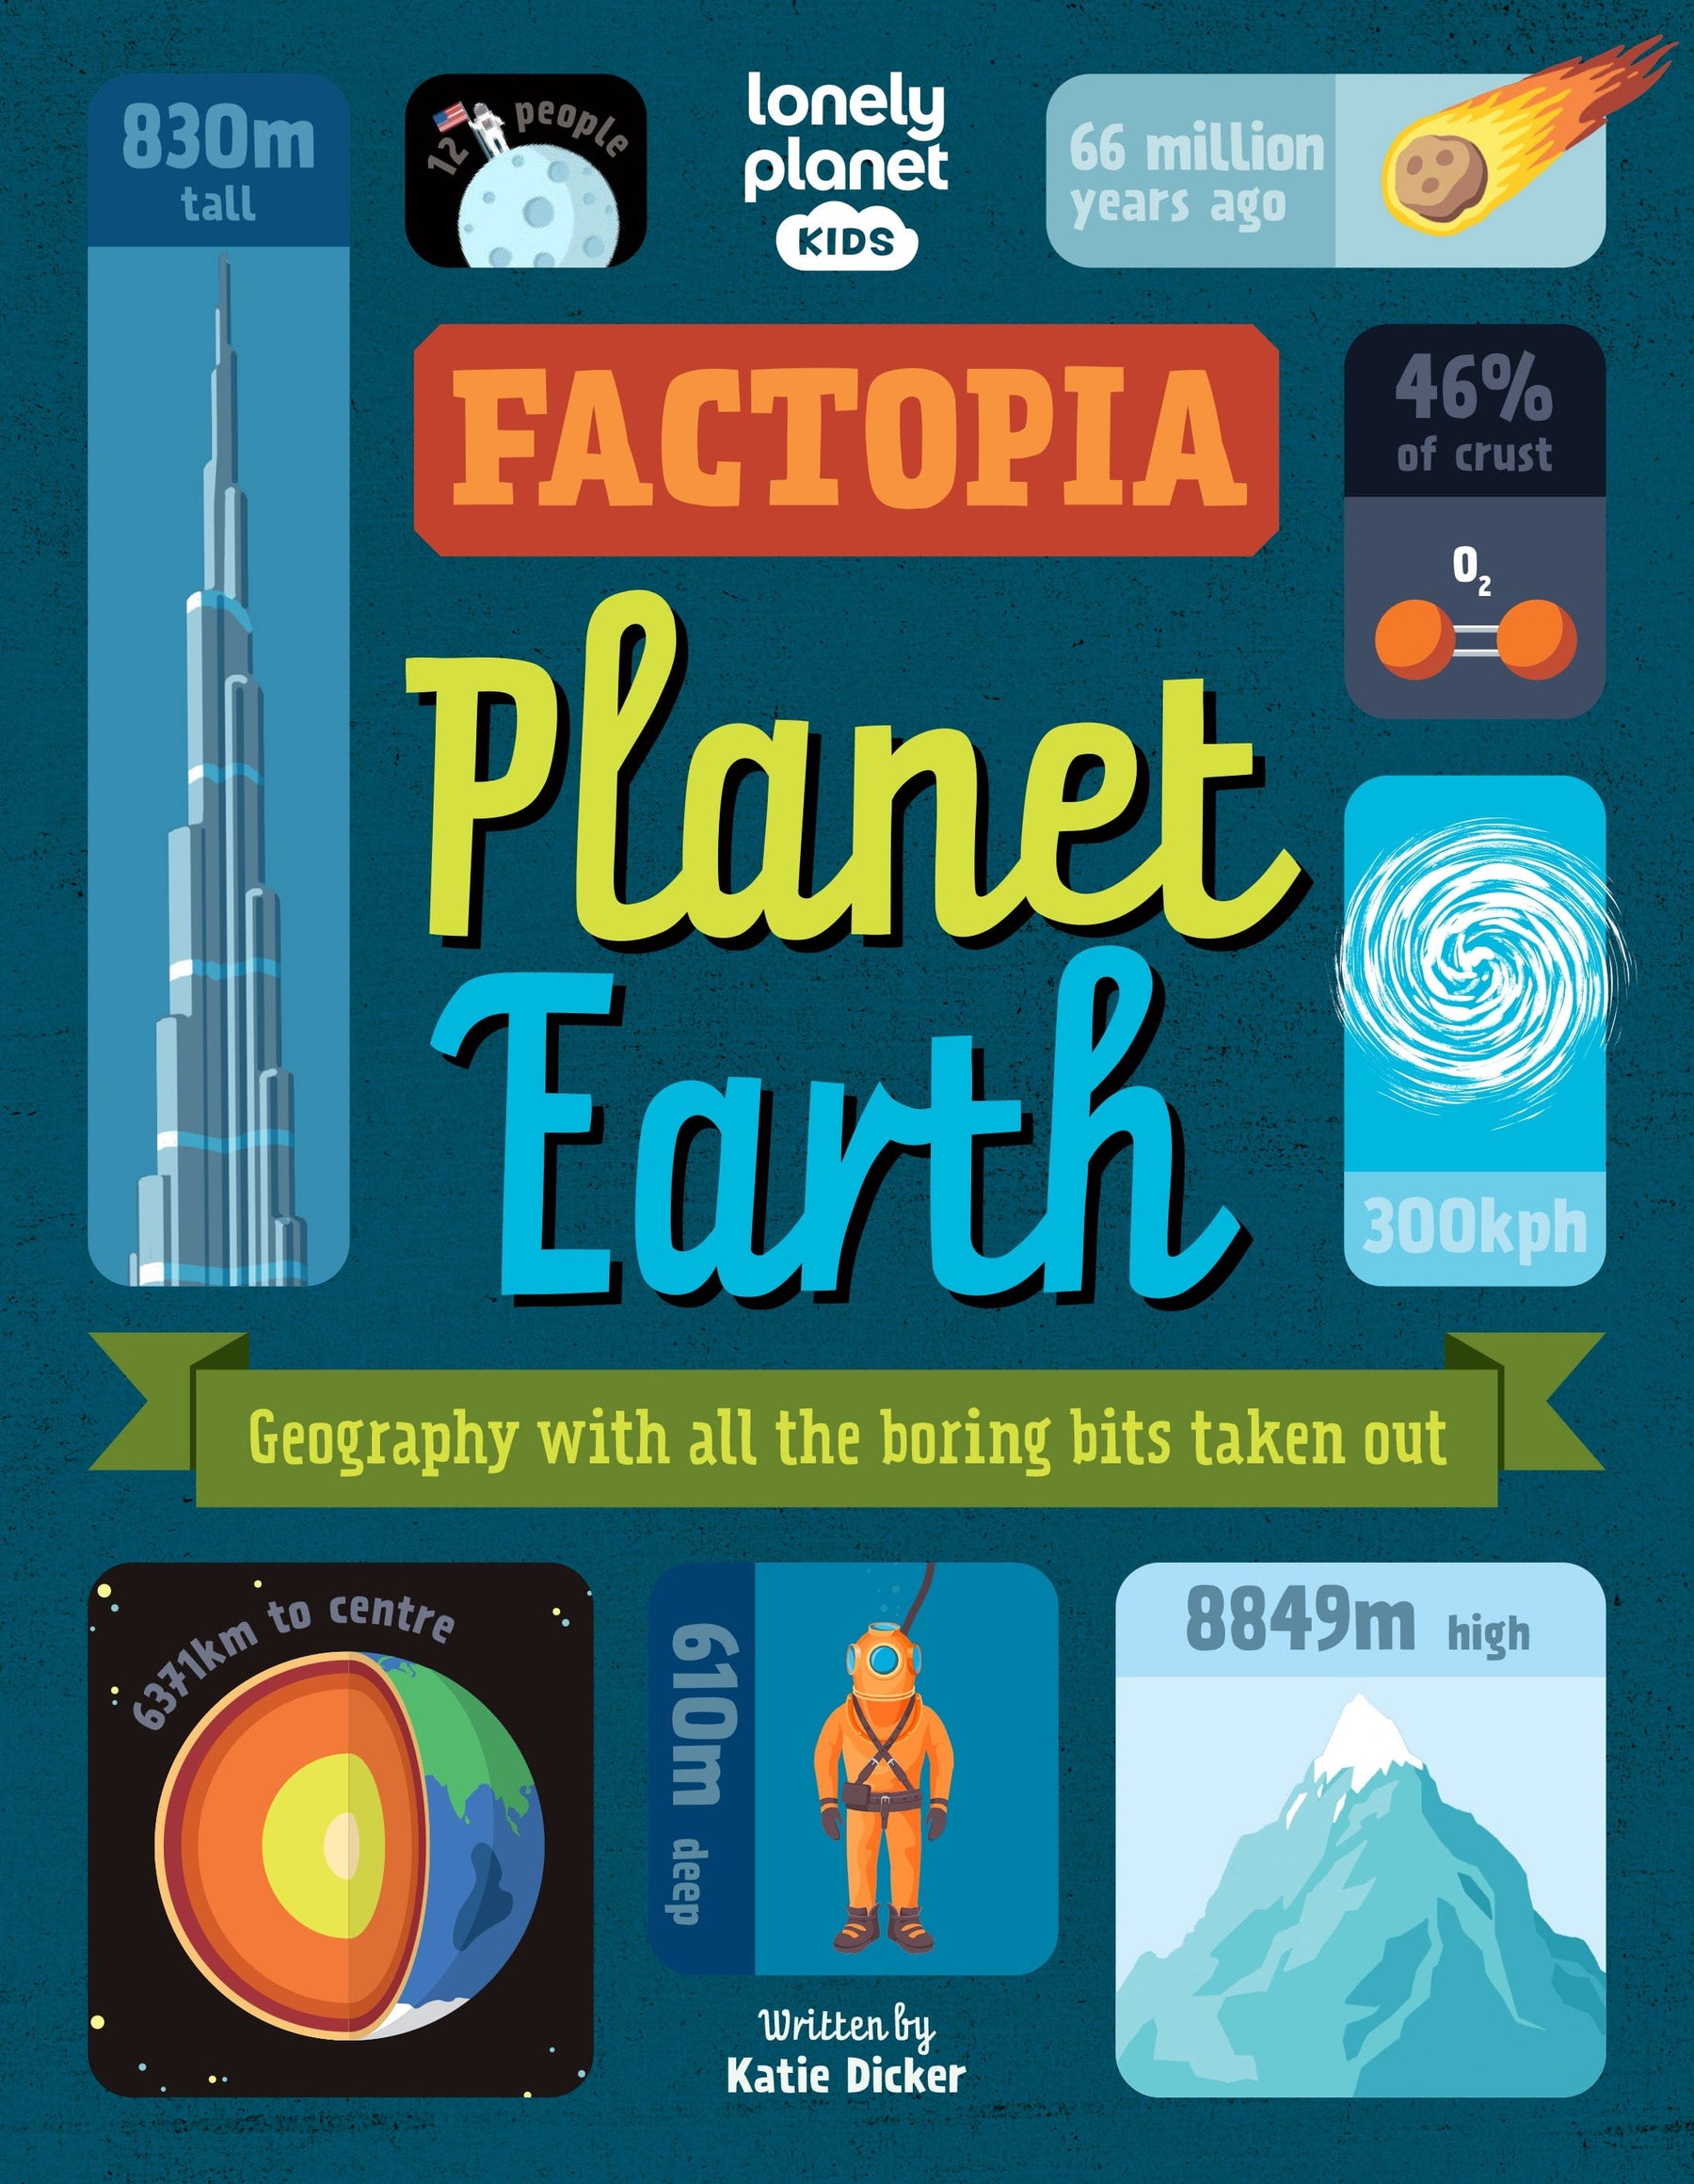 factopia-planet-earth-kids-lonely-planet